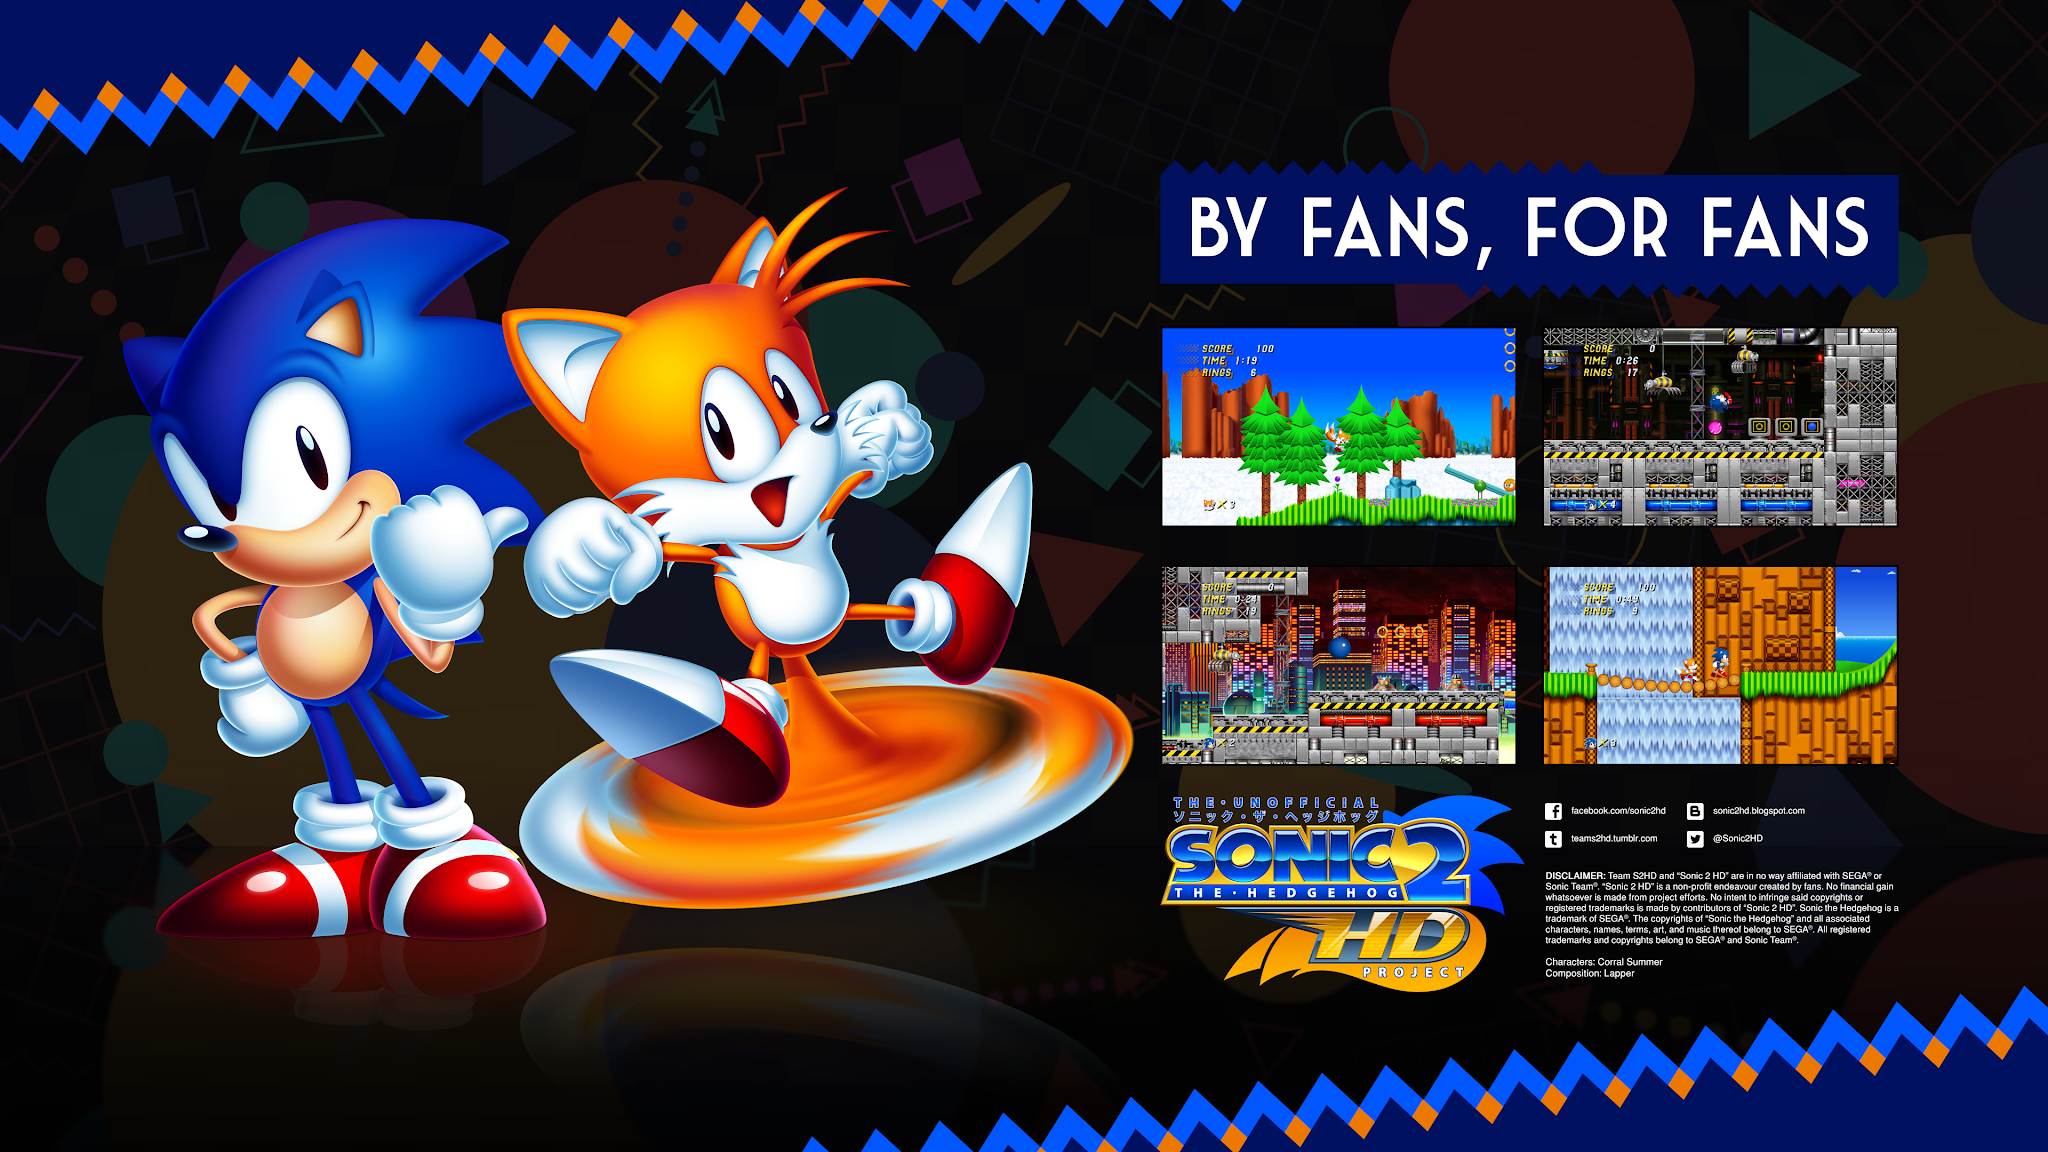 Sonic Frontiers has traditional 2D and 3D Sonic levels, too - Polygon